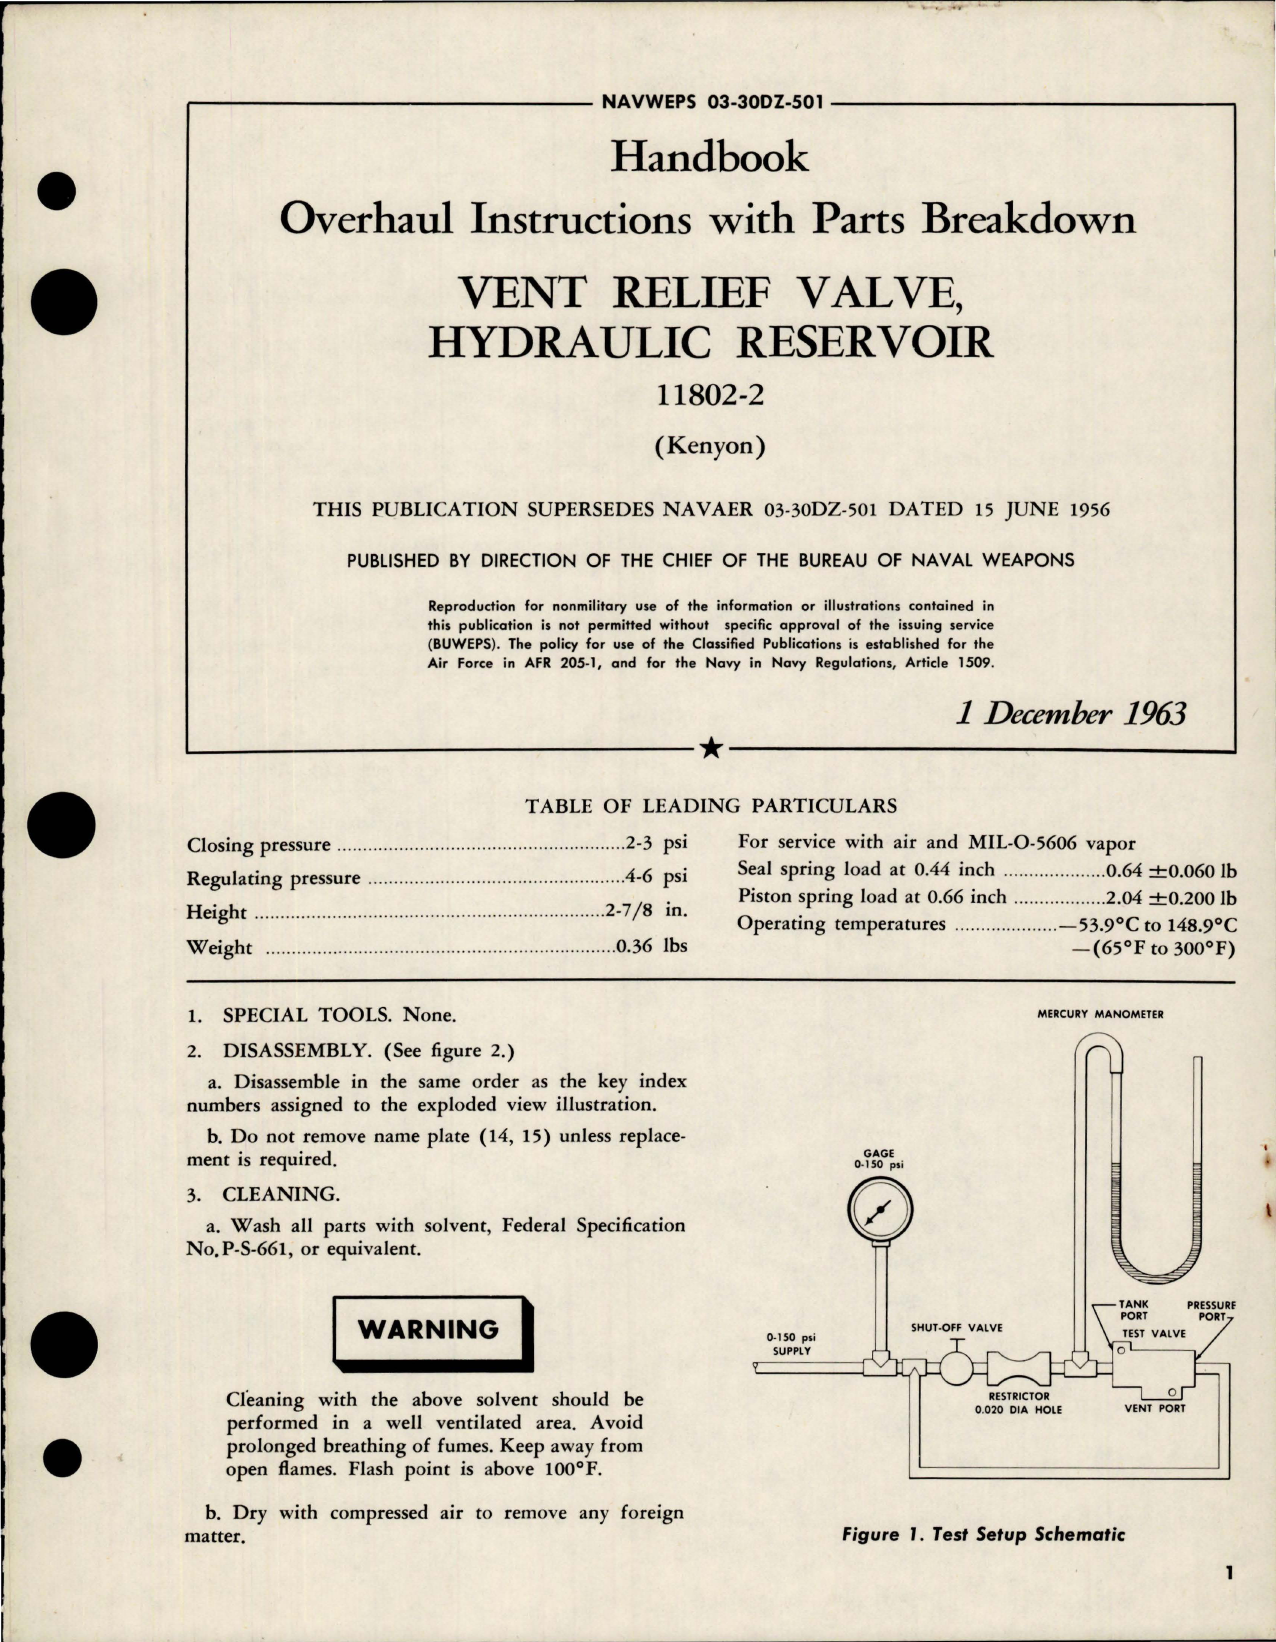 Sample page 1 from AirCorps Library document: Overhaul Instructions with Parts Breakdown for Hydraulic Reservoir Vent Relief Valve - Part 11802-2 